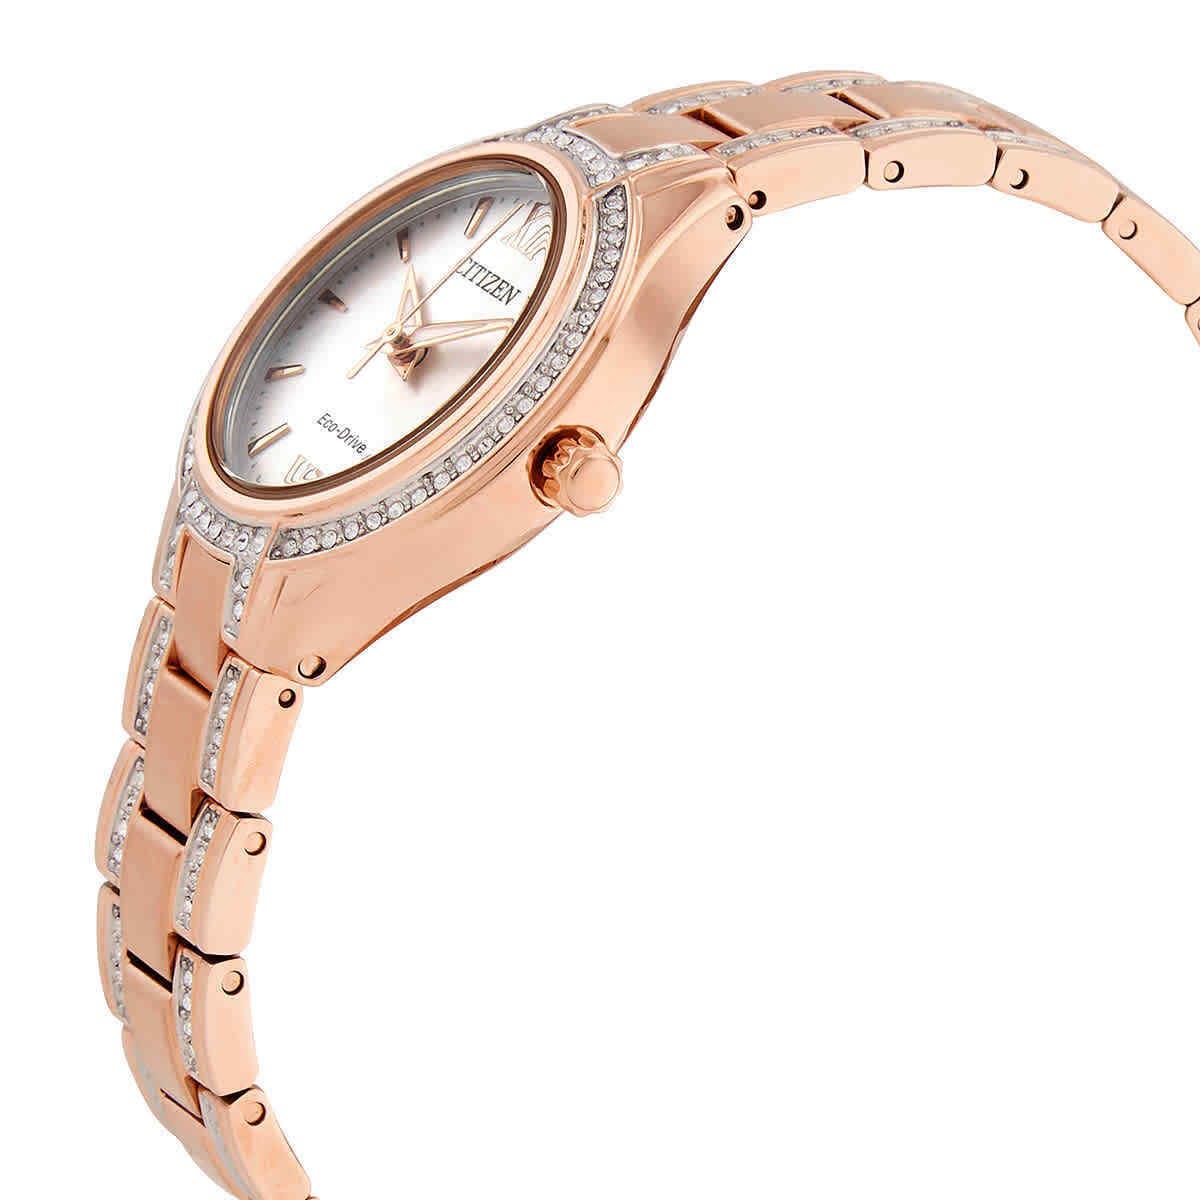 Citizen Silhouette Crystal Silver Dial Ladies Watch FE1233-52A - Dial: Silver, Band: Rose Gold-tone, Bezel: Rose Gold-tone